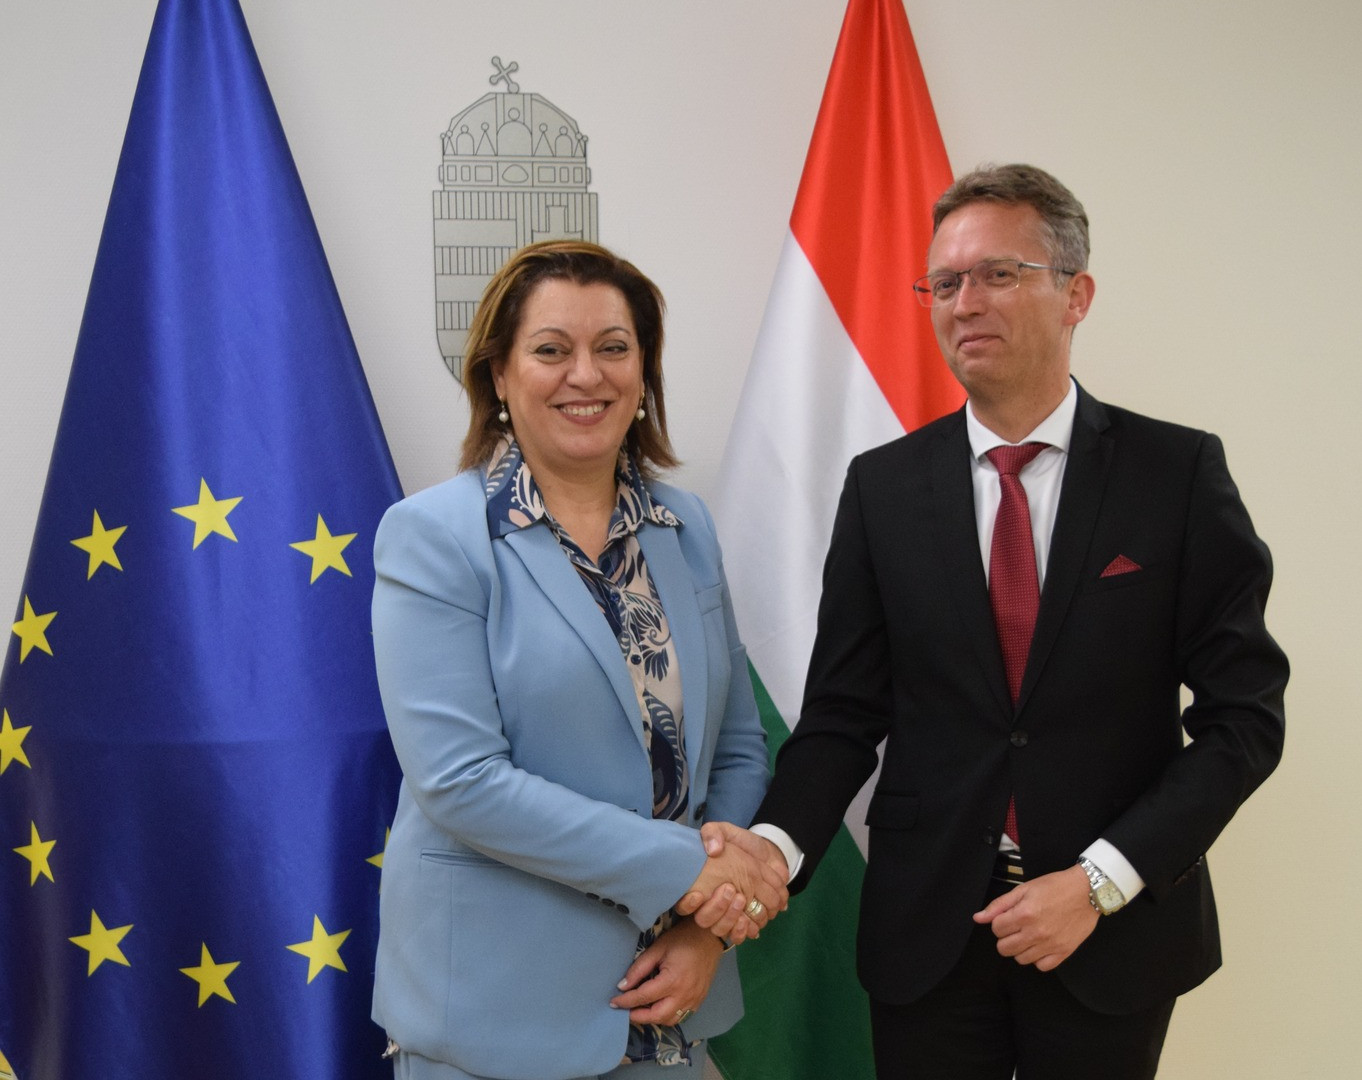 New Tender Worth HUF 75 Billion Called to Support SME Innovation in Hungary